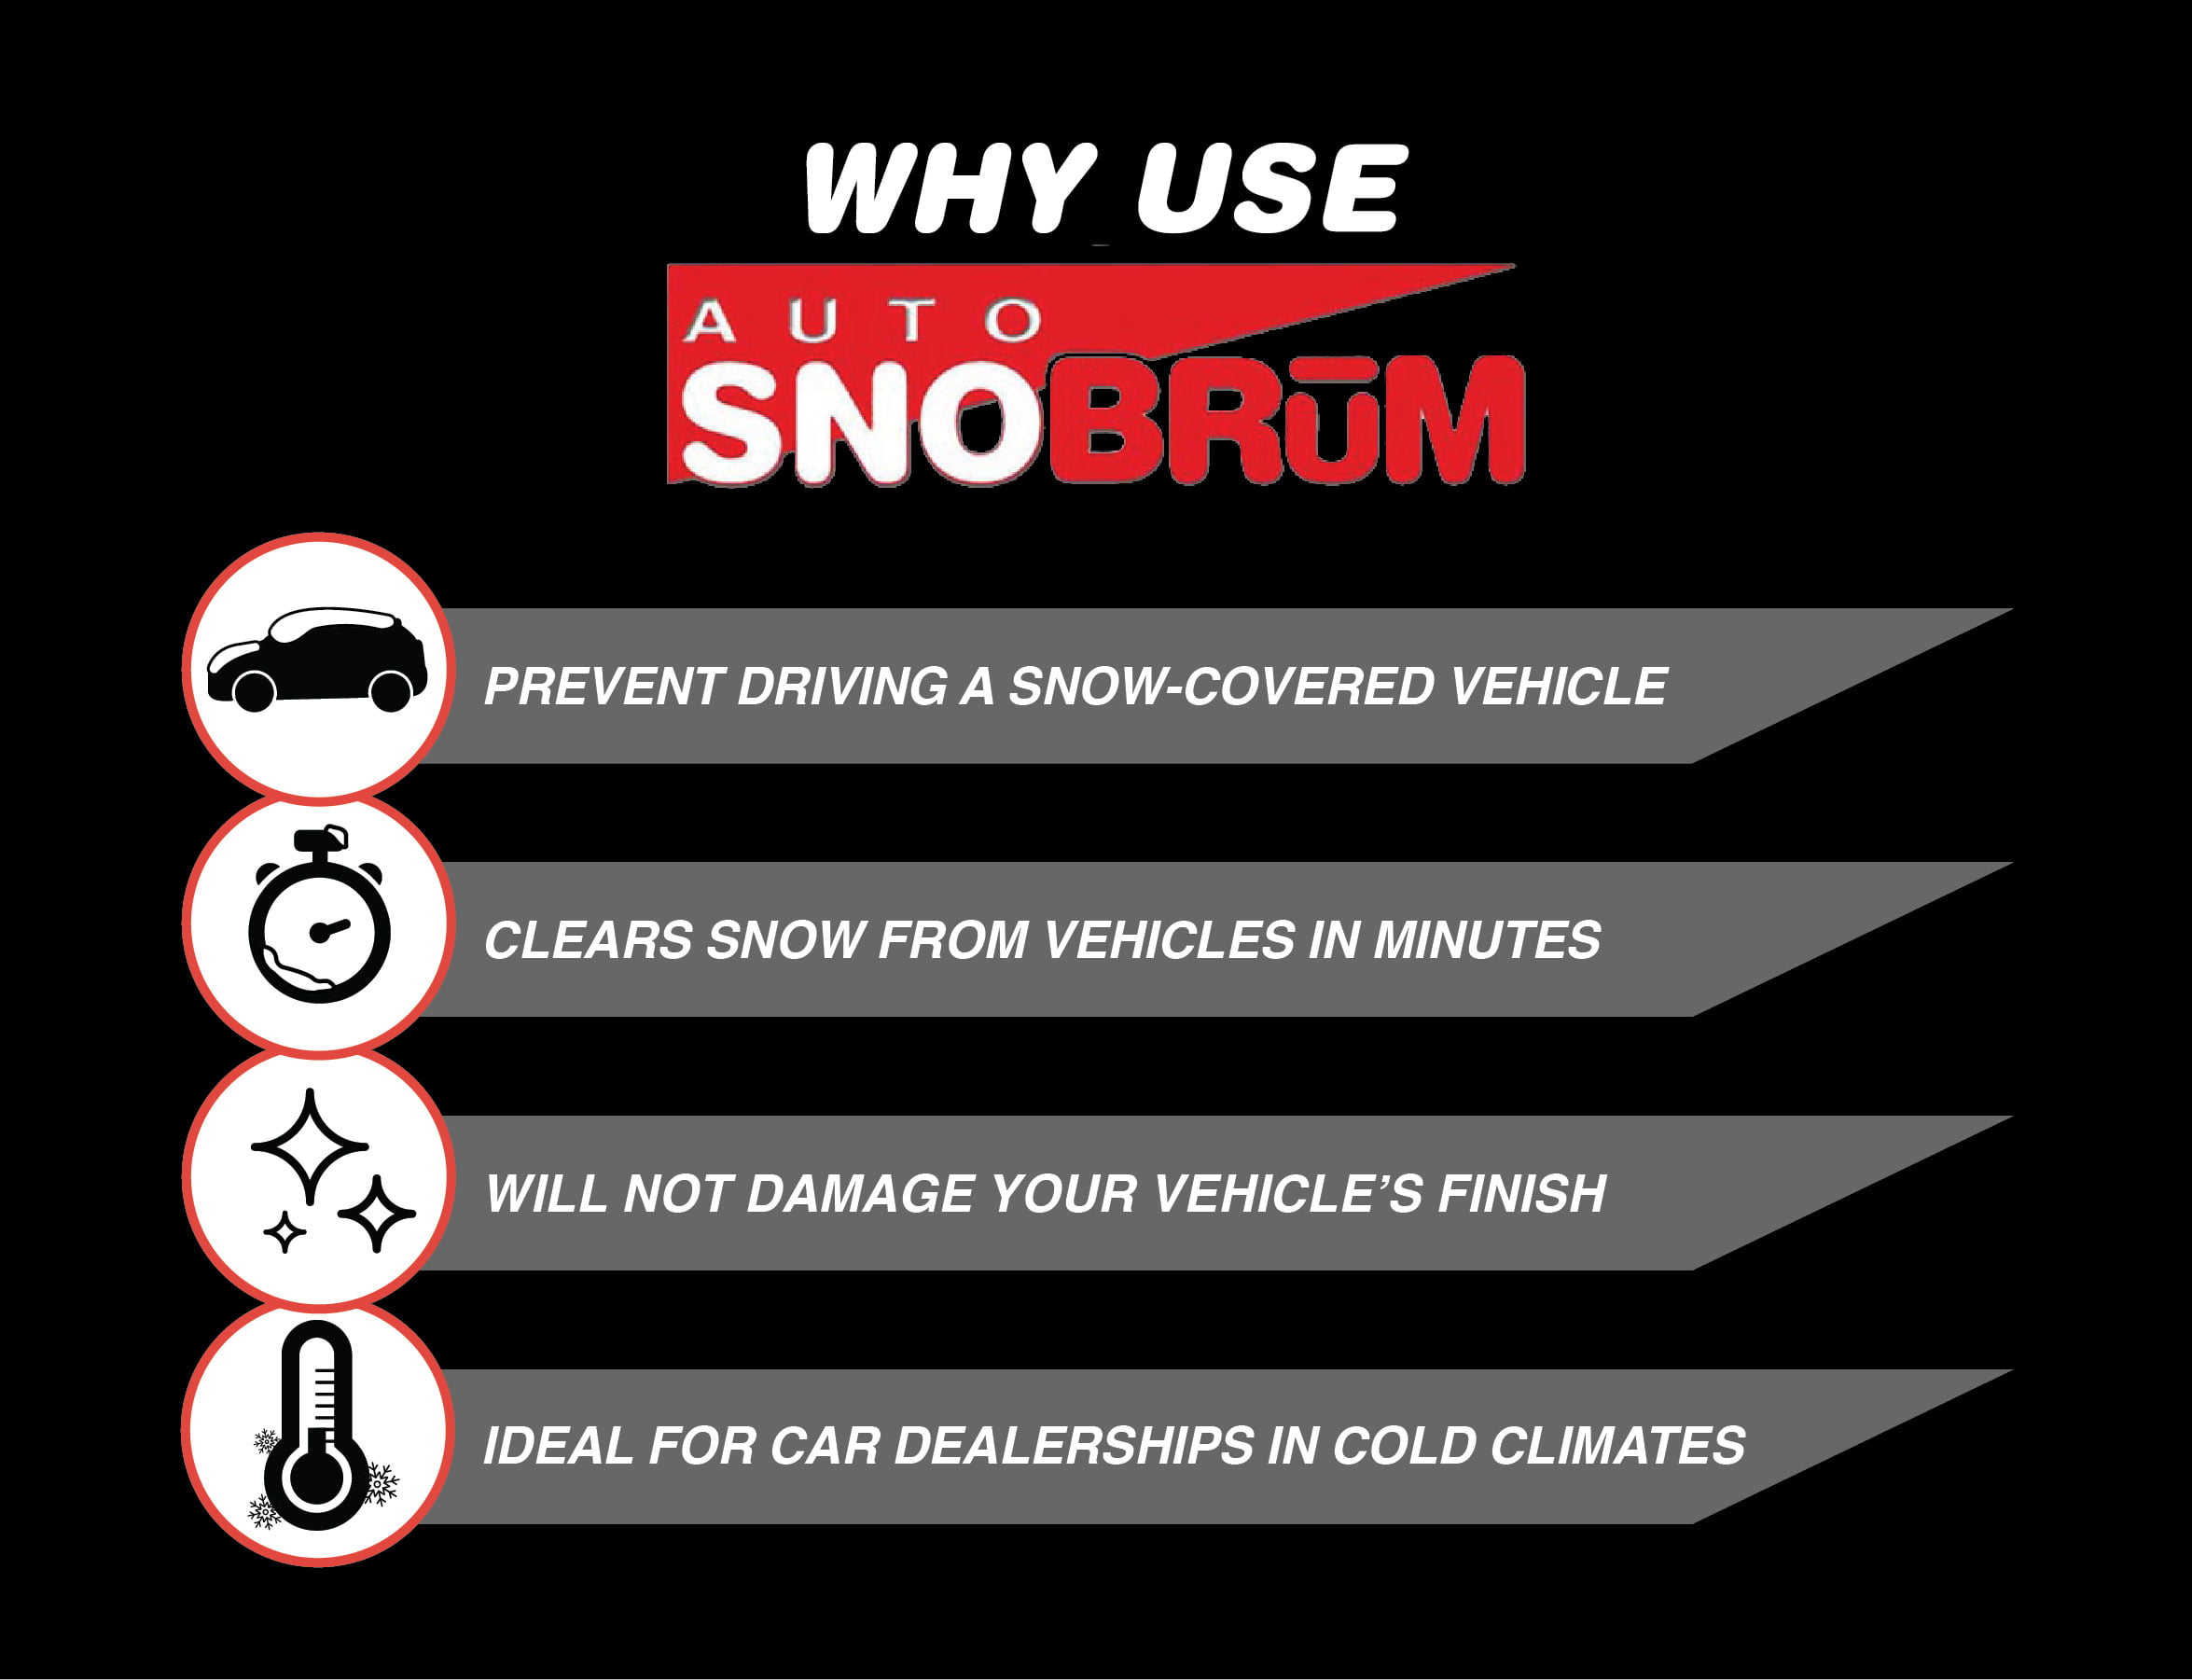 Quickly Remove Heavy Professional Grade Snow Remover Tool / Brush for Vehicles Scratchfree Wet Snow from Multiple Cars 48” Handle SnoPro by SnoBrum Push-Broom Design 